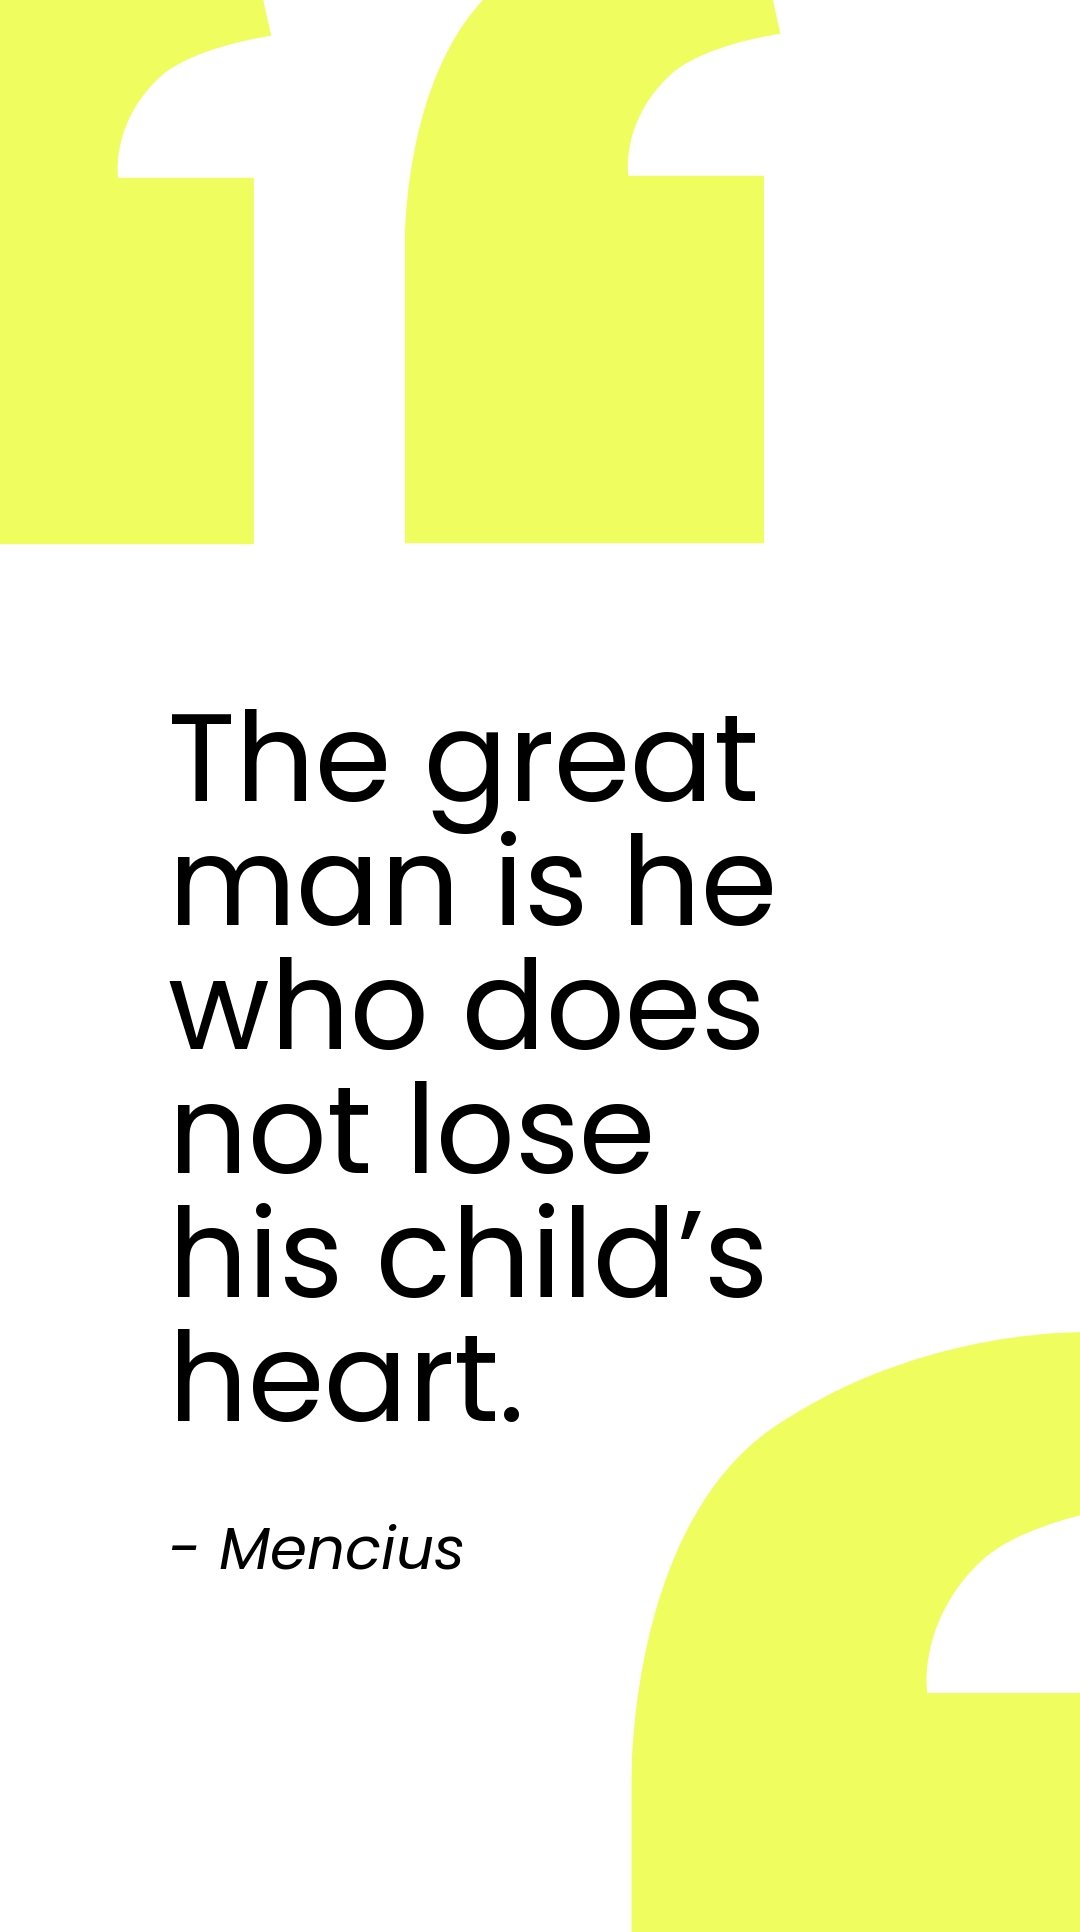 Mencius - The great man is he who does not lose his child’s heart.